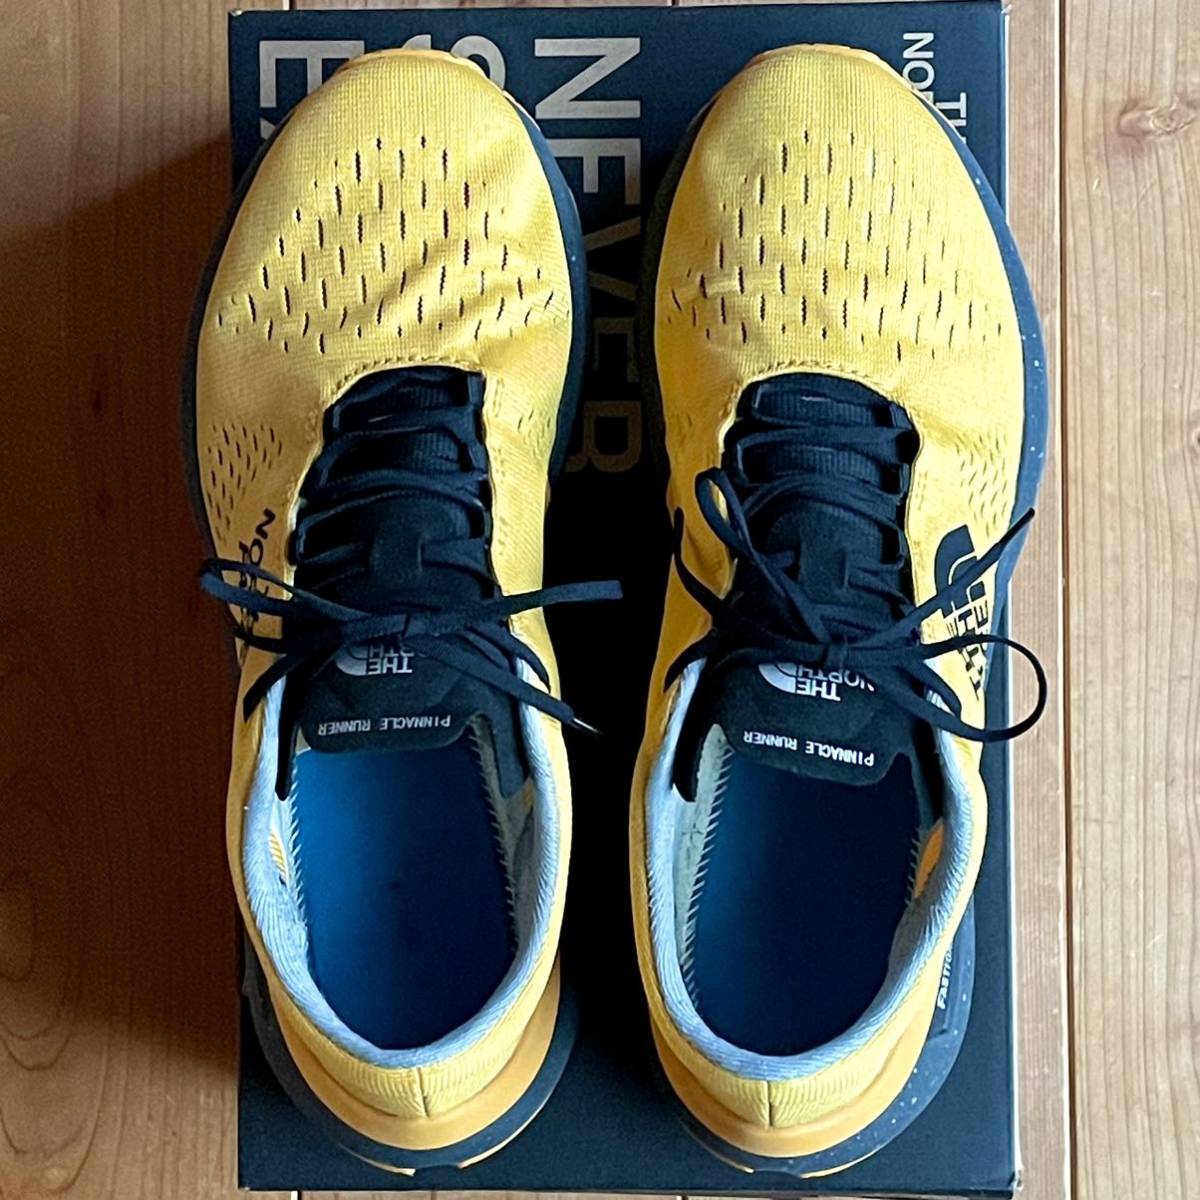 [ prompt decision * used * free shipping ] The North Face ivorub Runner Progres sib27.0cm yellow running shoes insole less THENORTHFACE